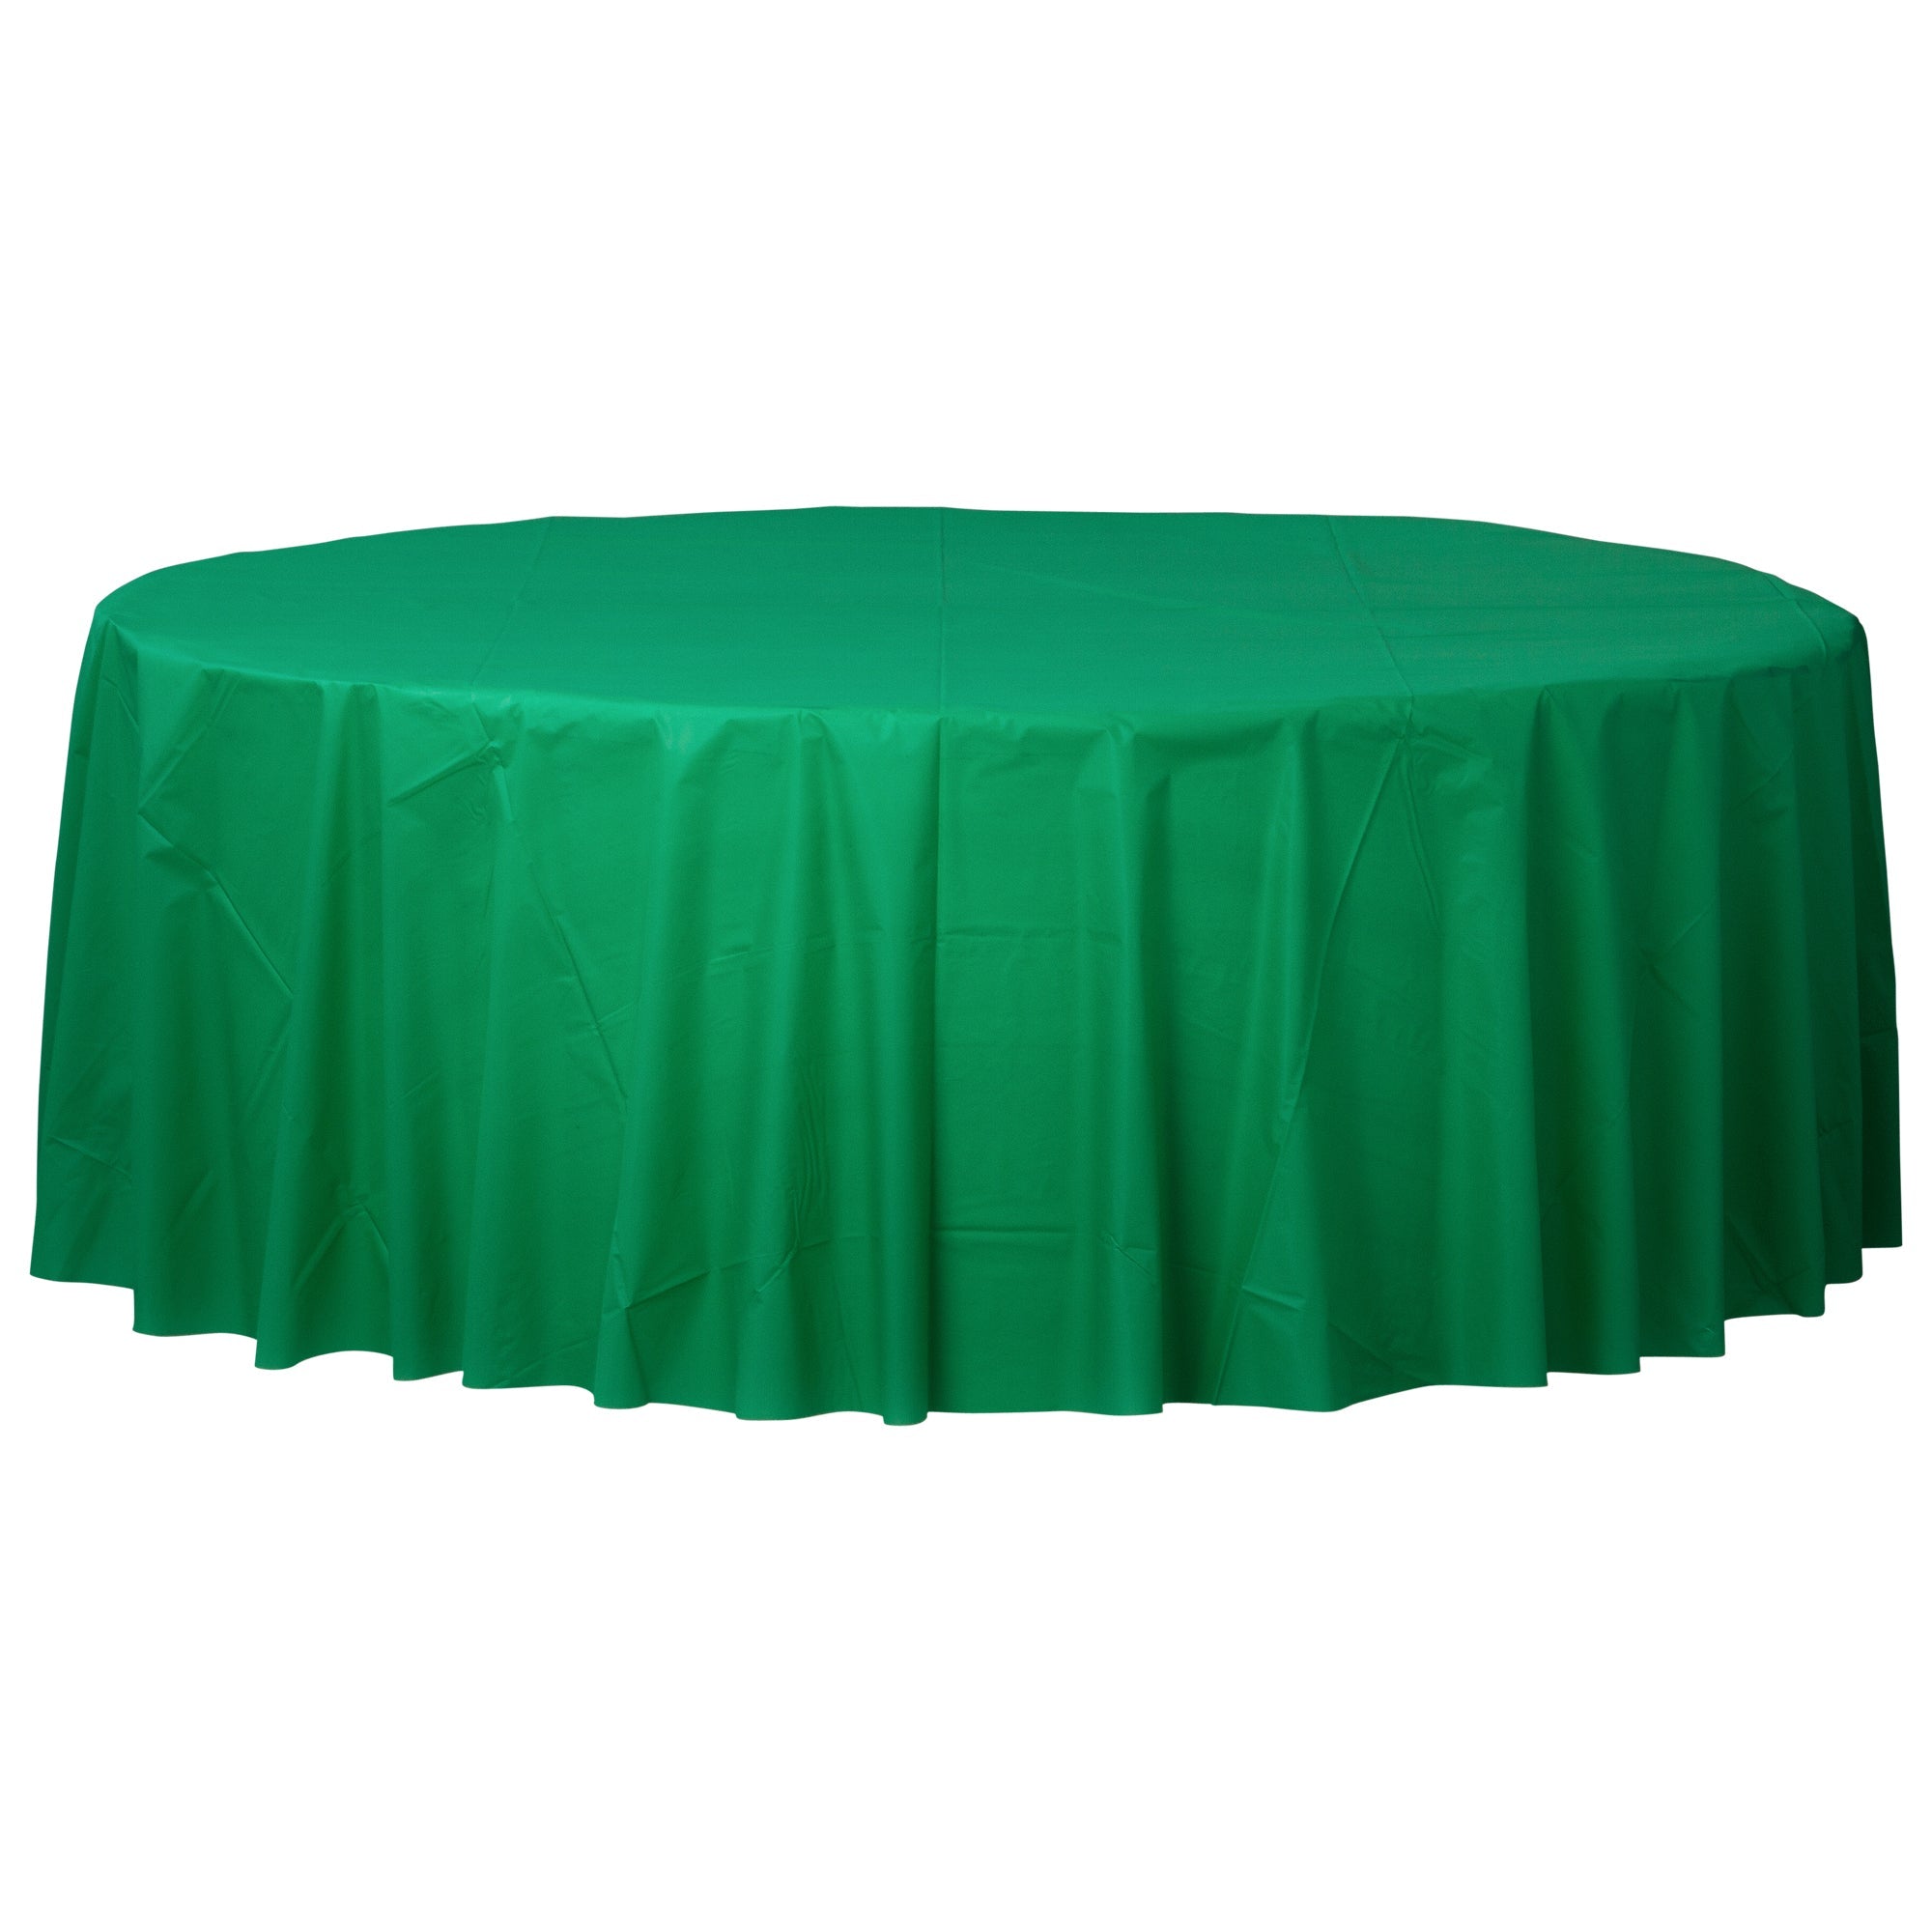 Festive Green 84" Round Plastic Table Cover